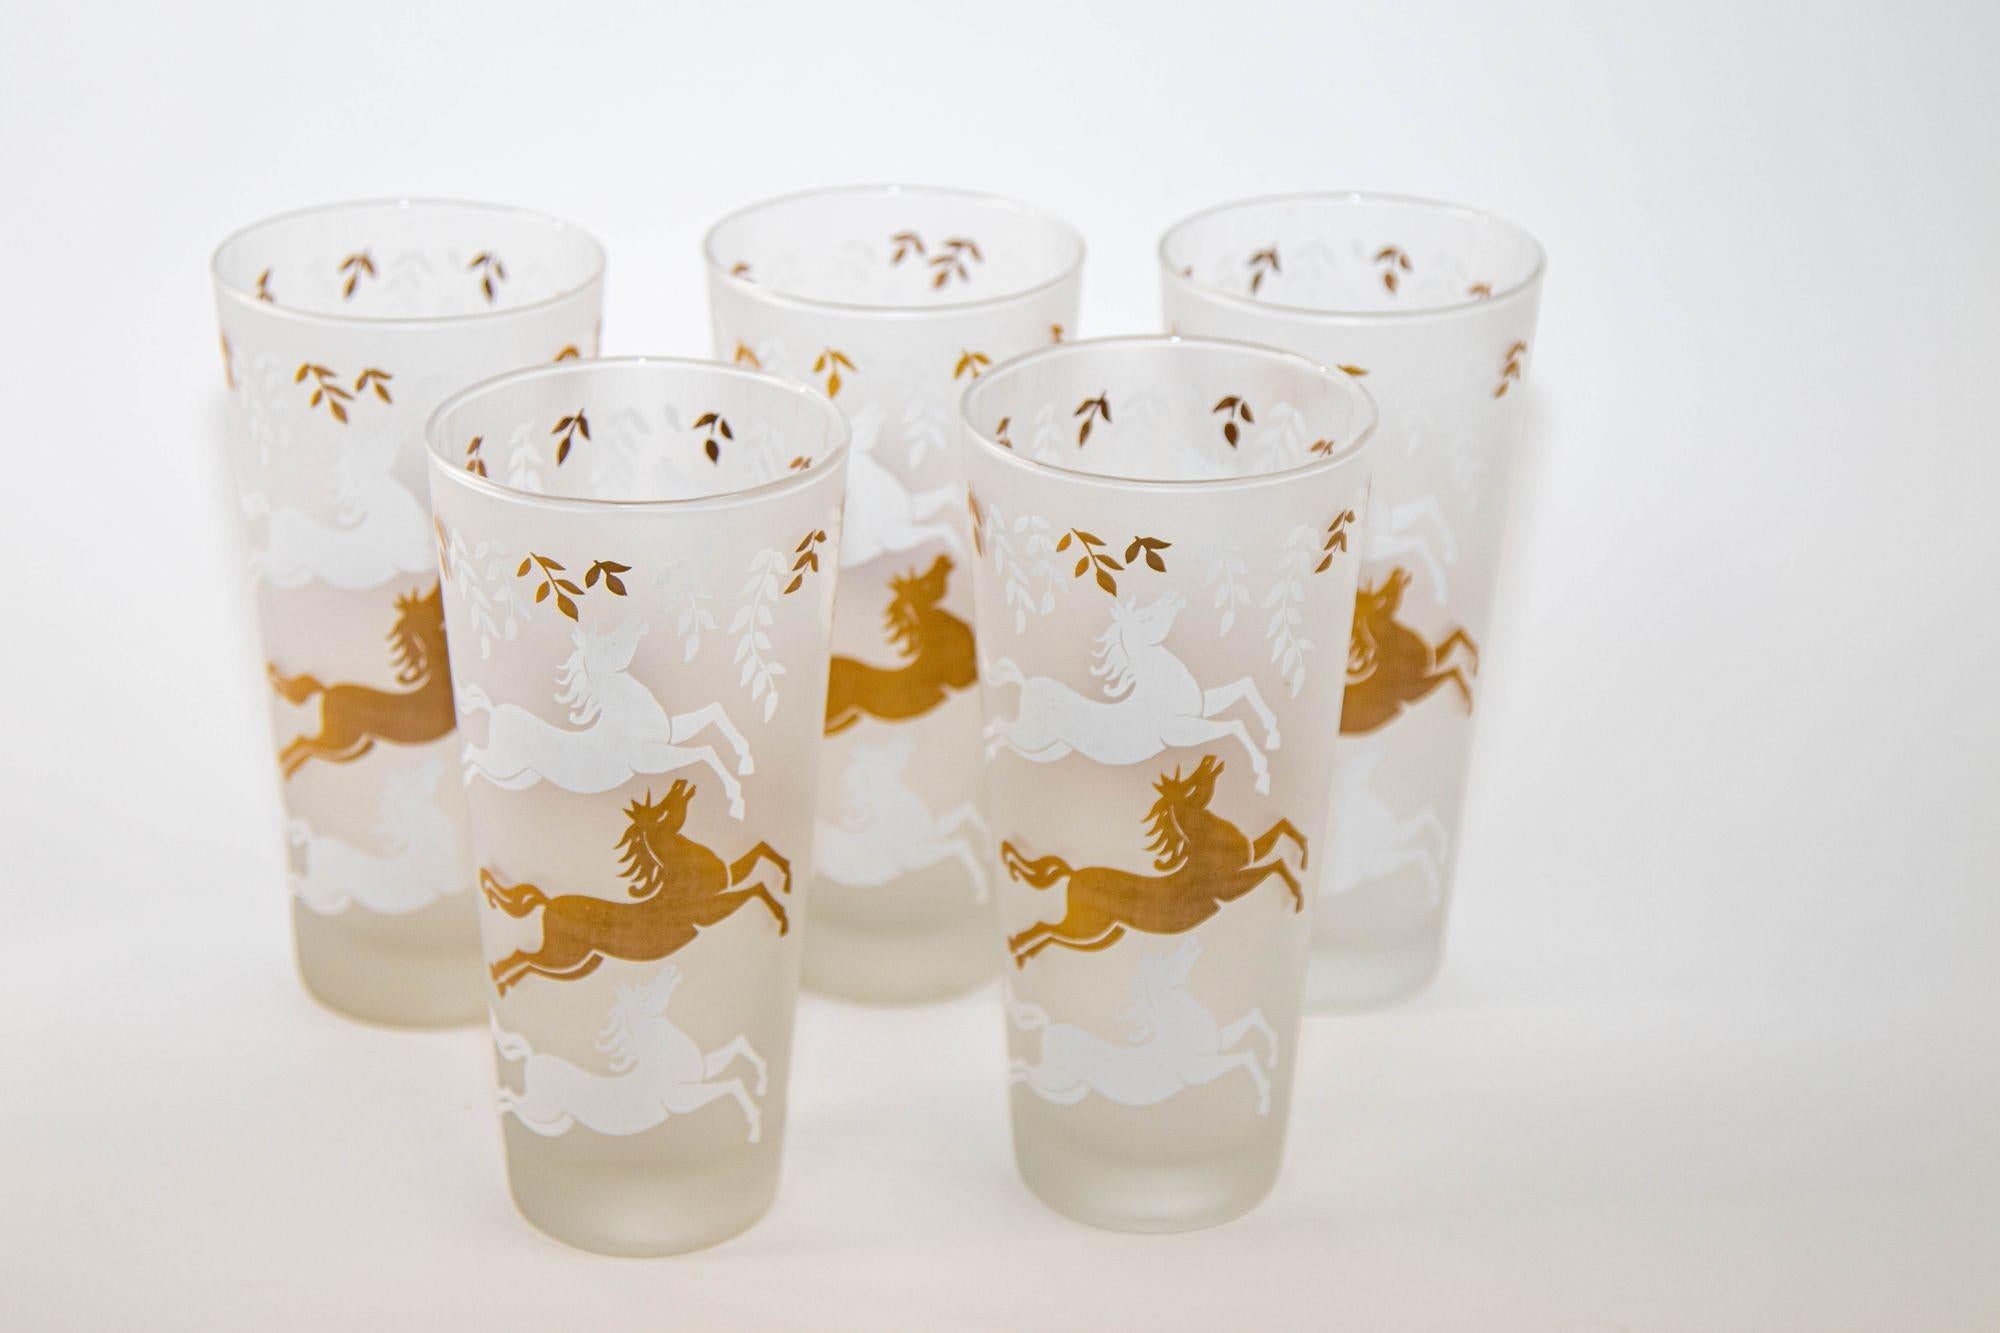 1950 Tumbler Frosted Drink Glasses Cavalcade by Libbey Galloping Horse Set of 5 For Sale 6